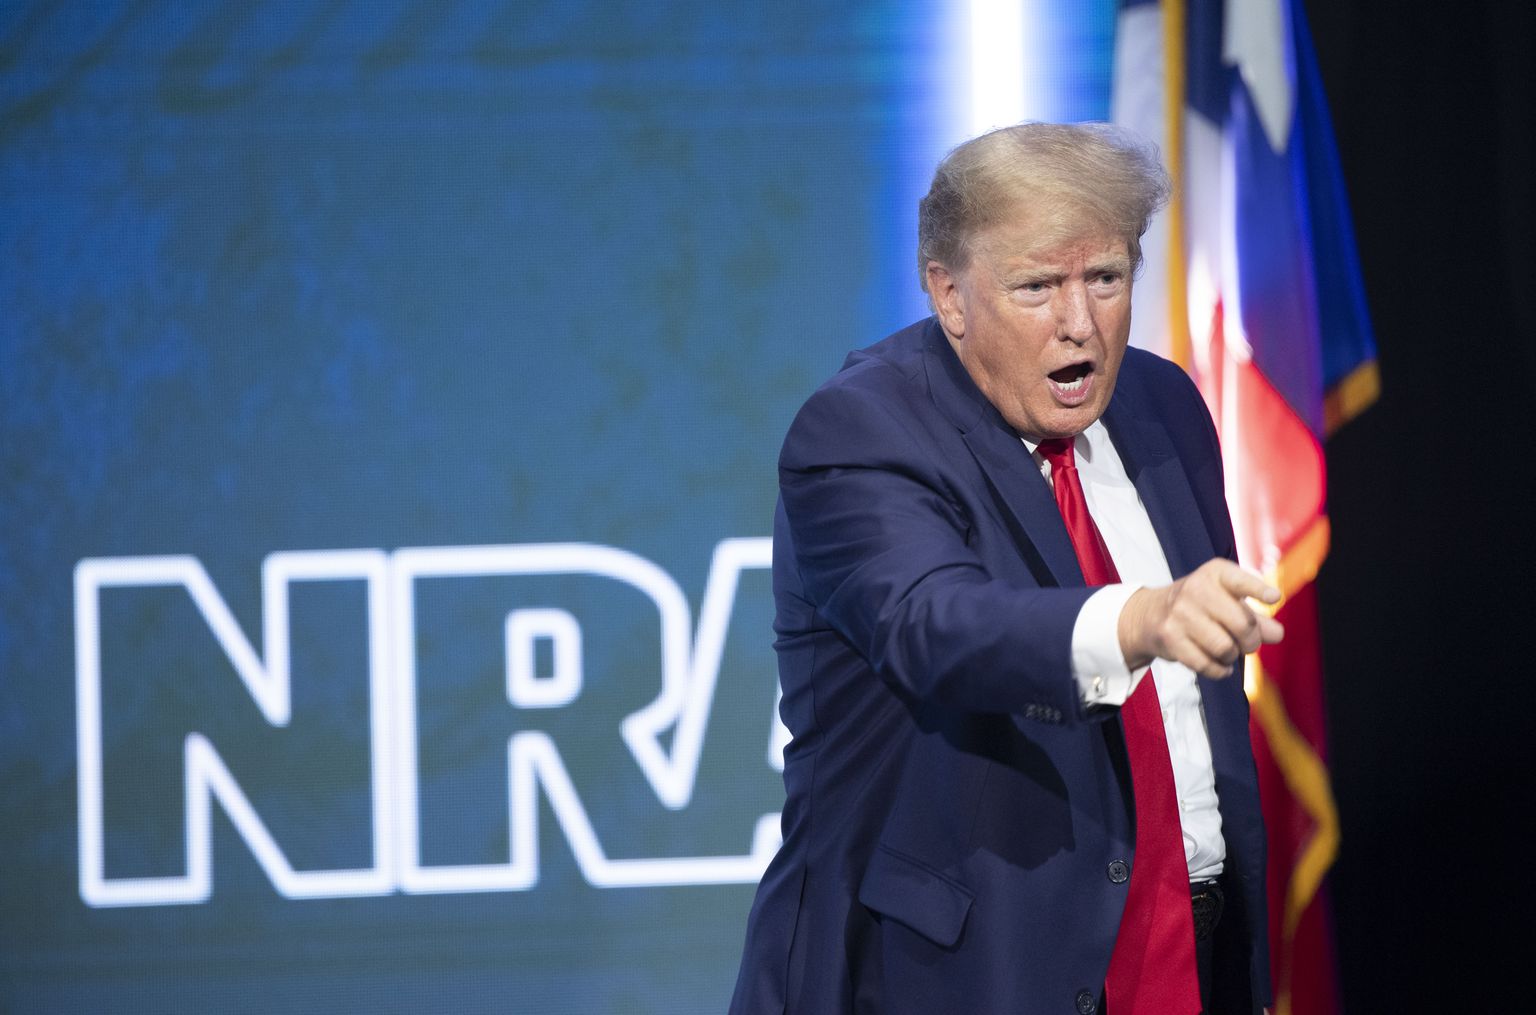 May 27, 2022, Houston, TX, United States: Former U.S. president DONALD TRUMP gives the keynoe address at the annual leadership forum of the National Rifle Association (NRA) in Houston on May 27, 2022. (Credit Image: © Bob Daemmrich/ZUMA Press Wire)